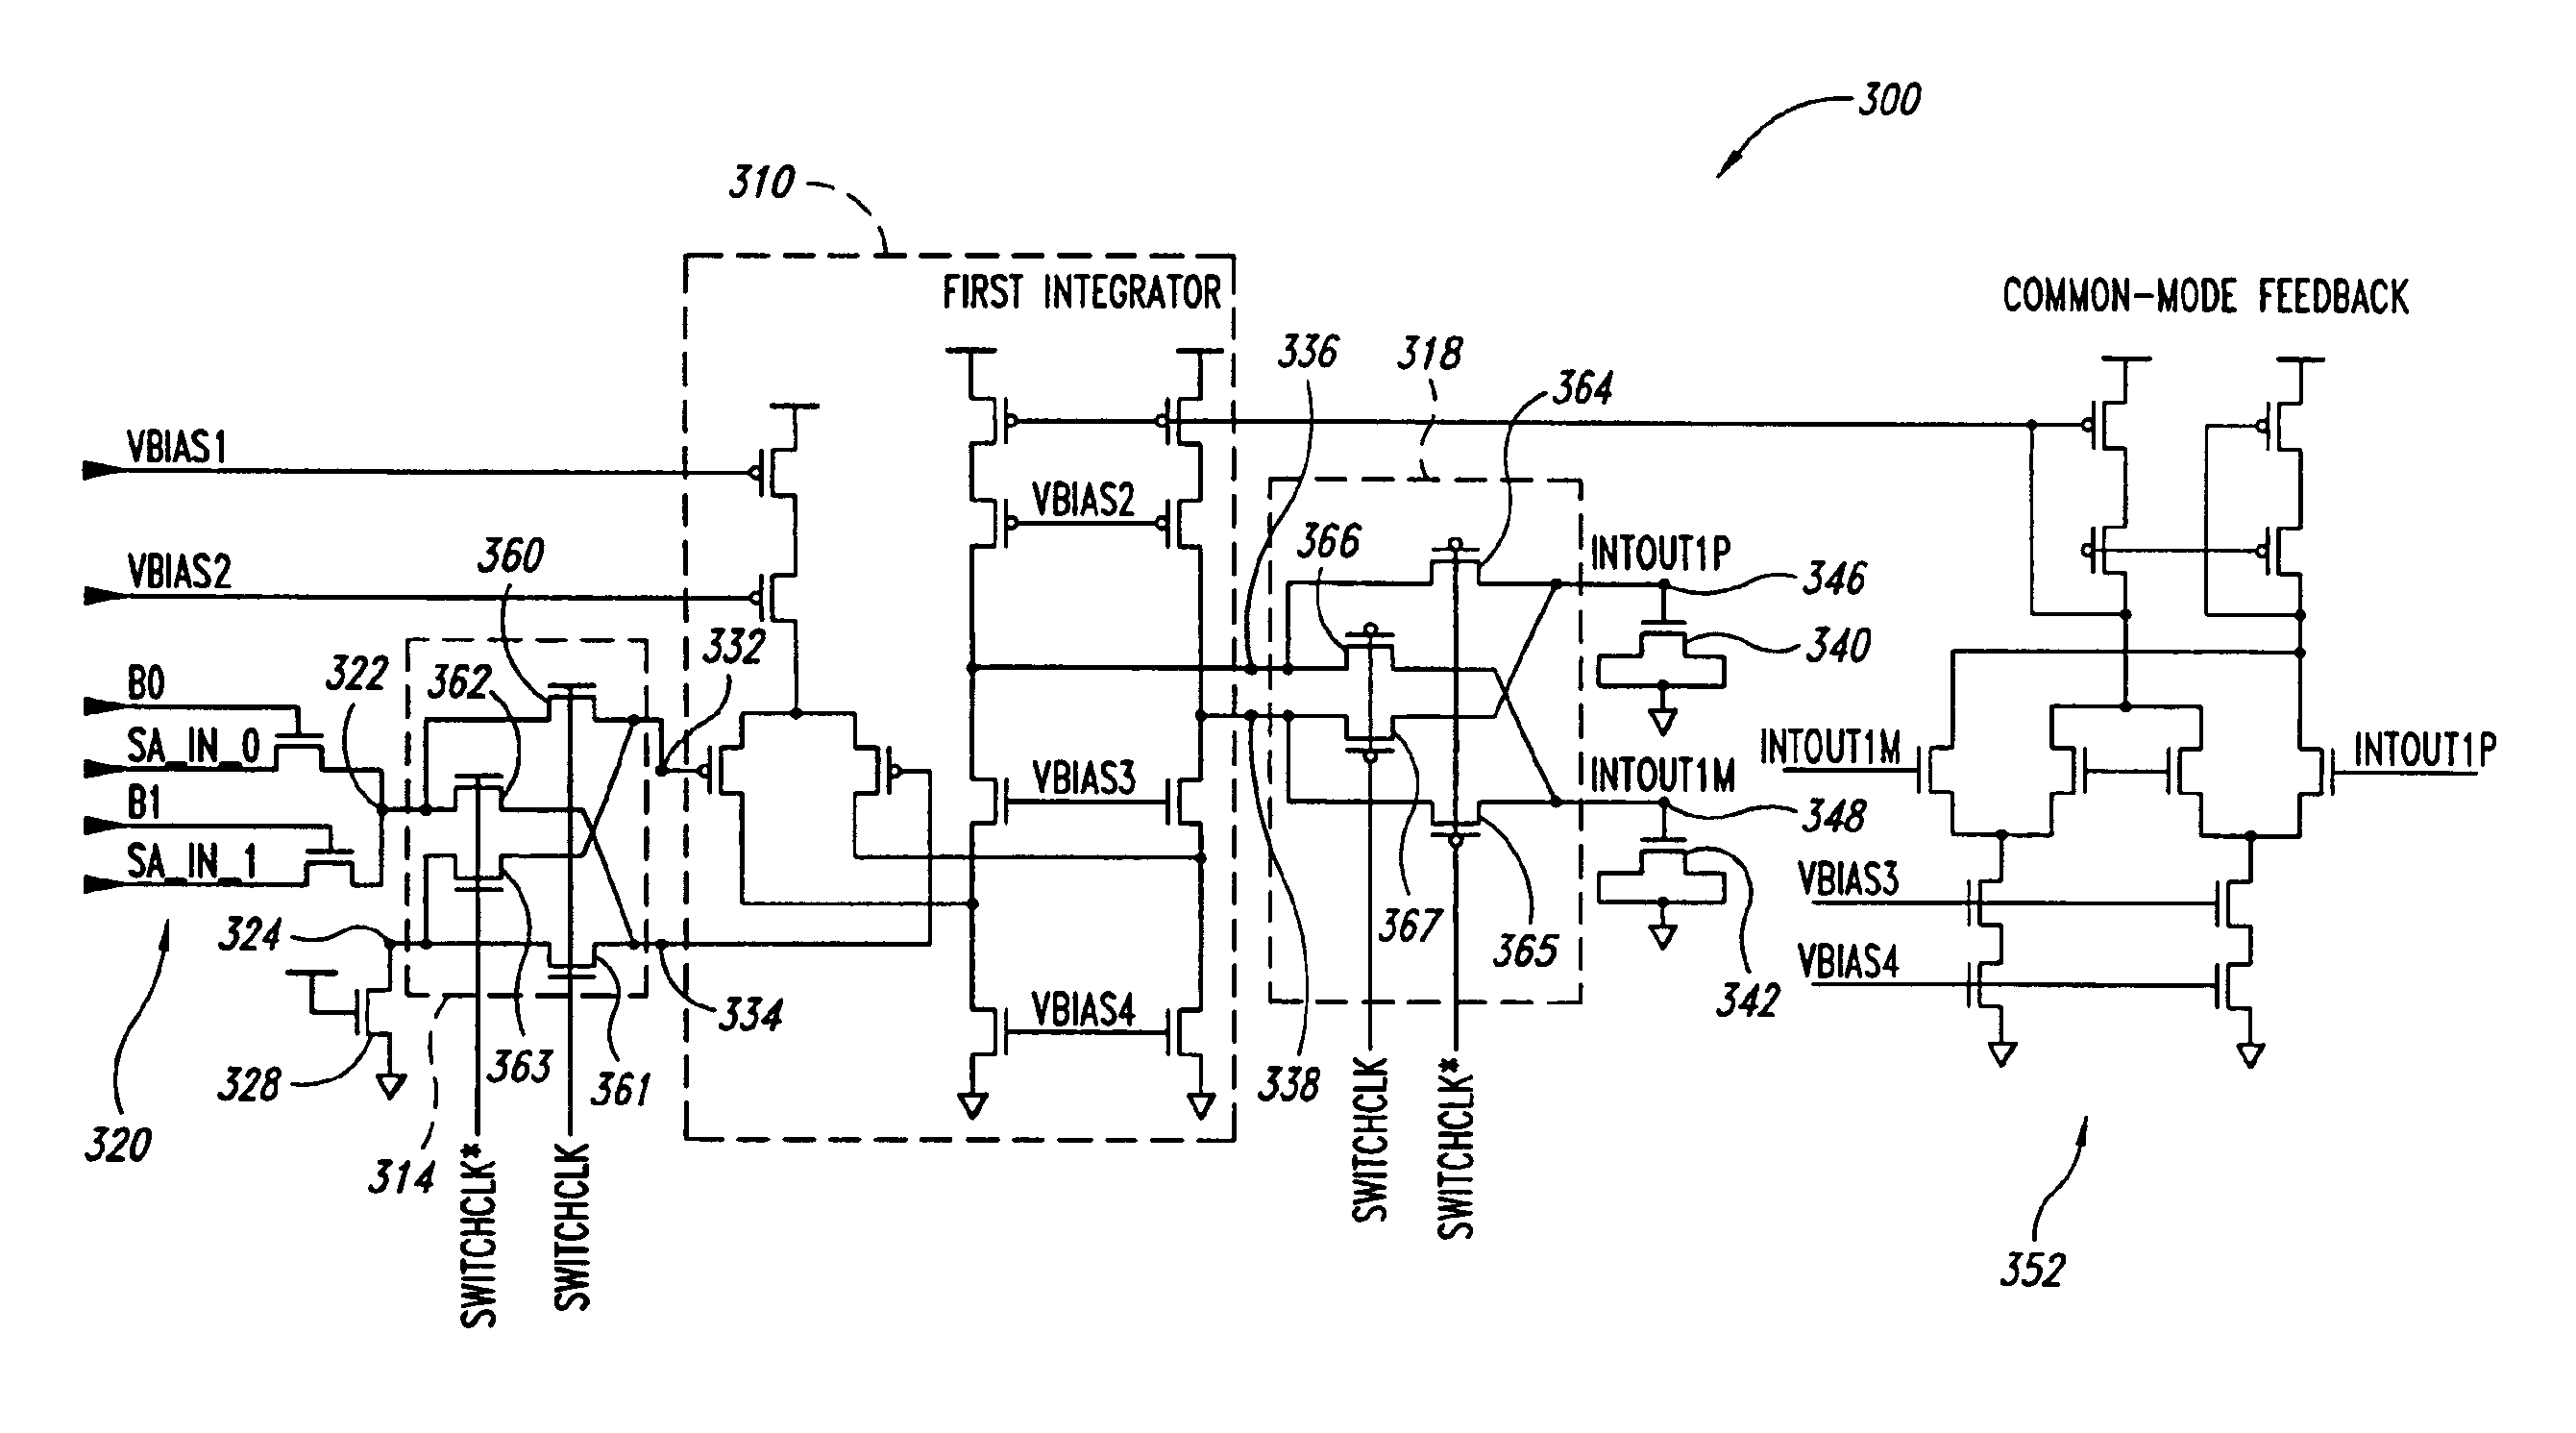 Noise resistant small signal sensing circuit for a memory device